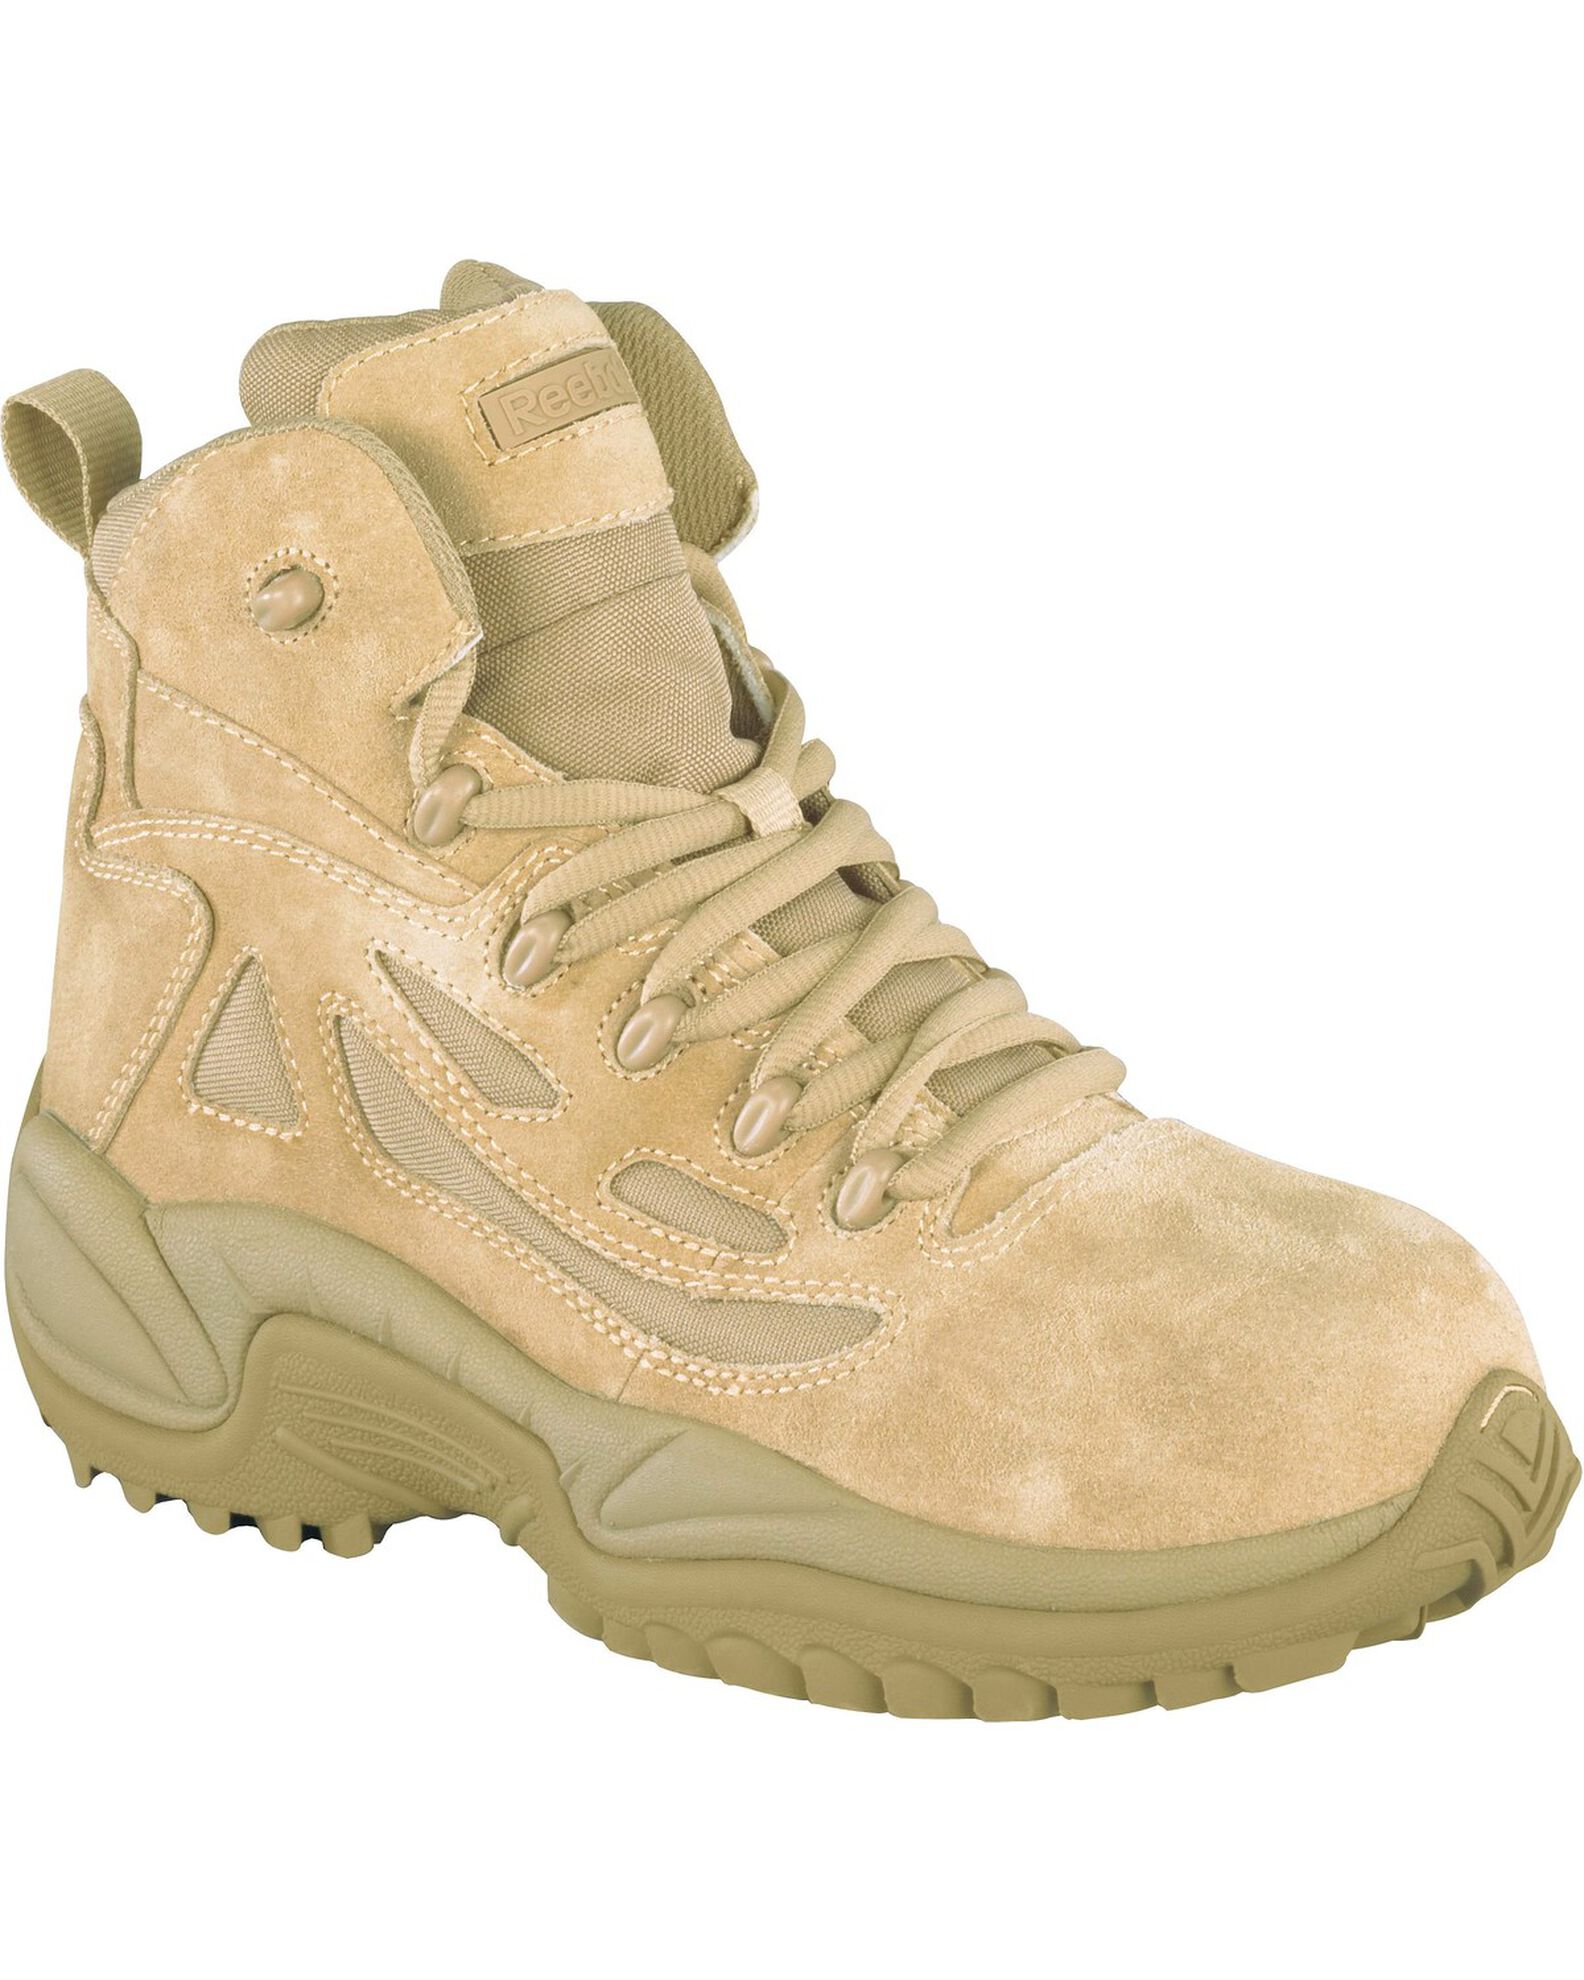 Reebok Men's Stealth 6" Lace-Up with Side-Zip Tactical Boots - Composite Toe | Boot